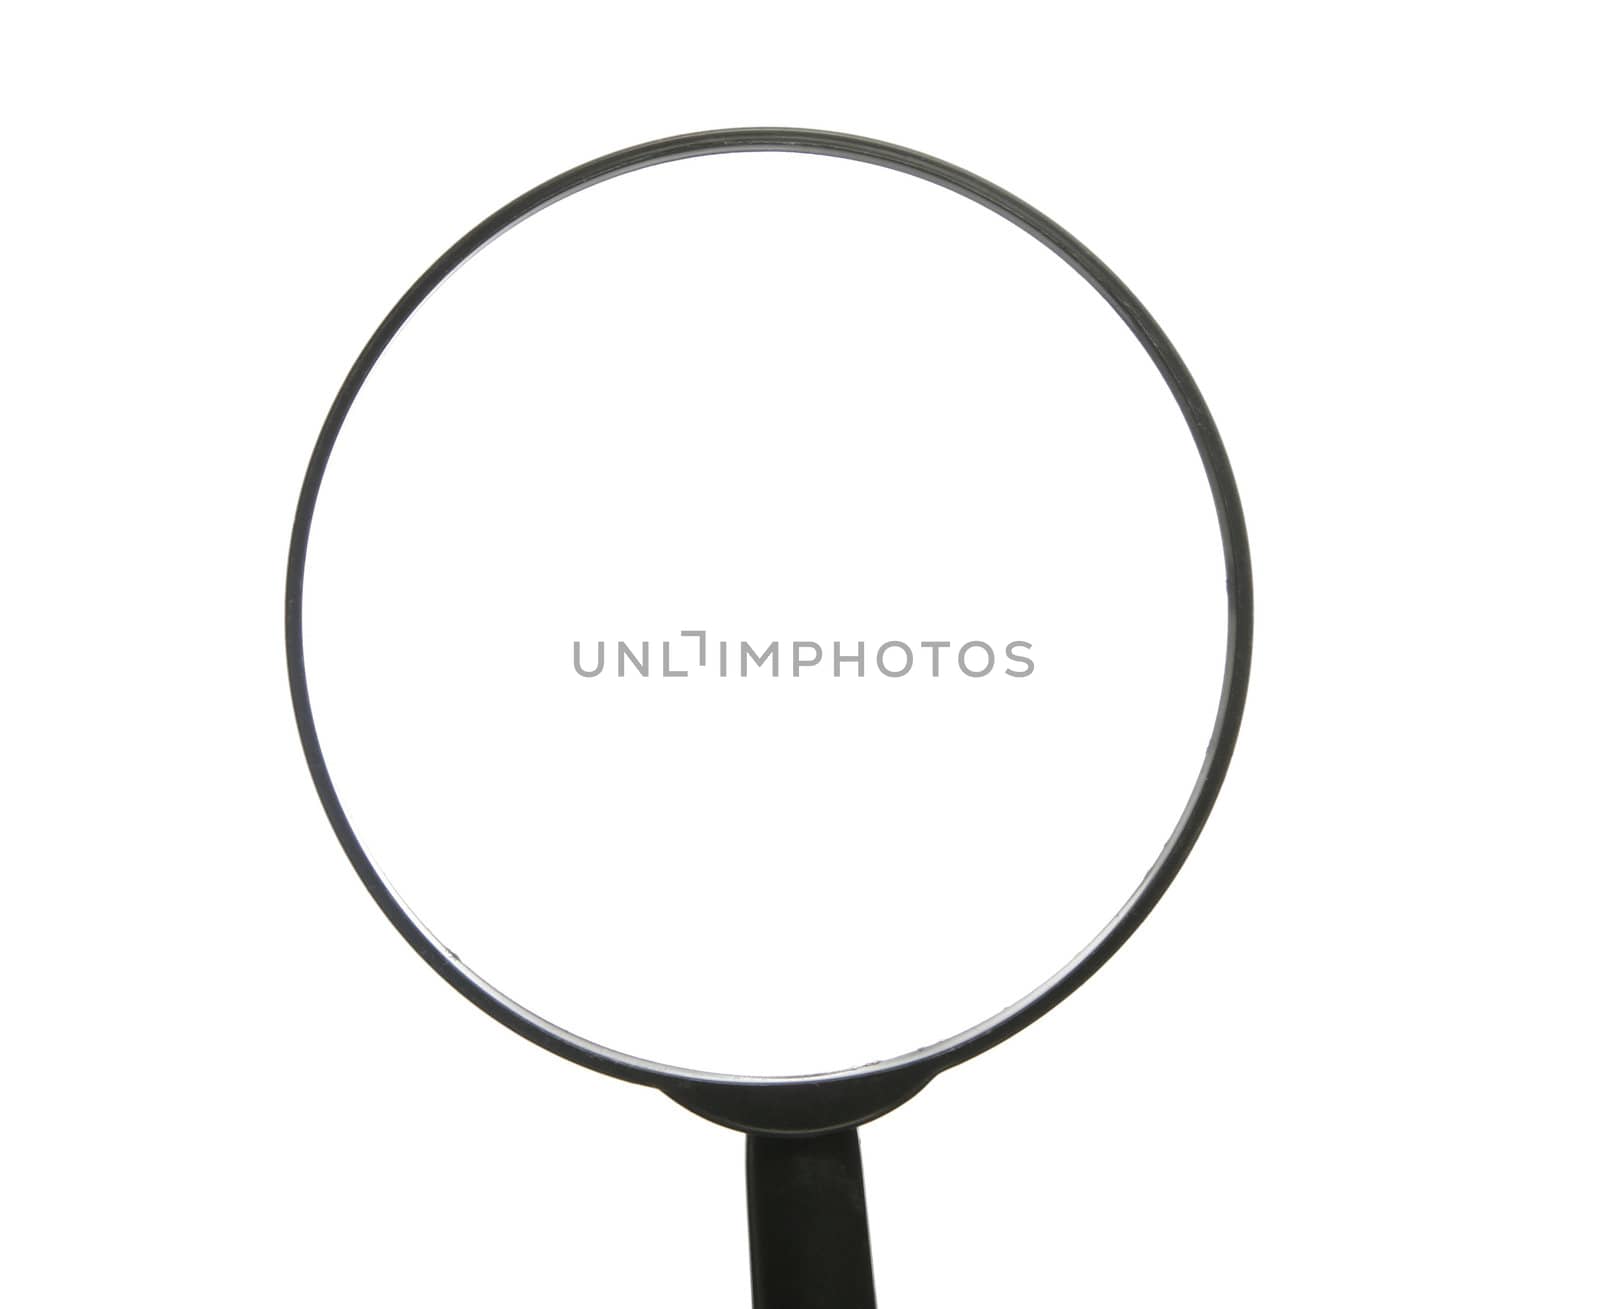 Top Of A Simple Black Magnifying Glass Over White Background